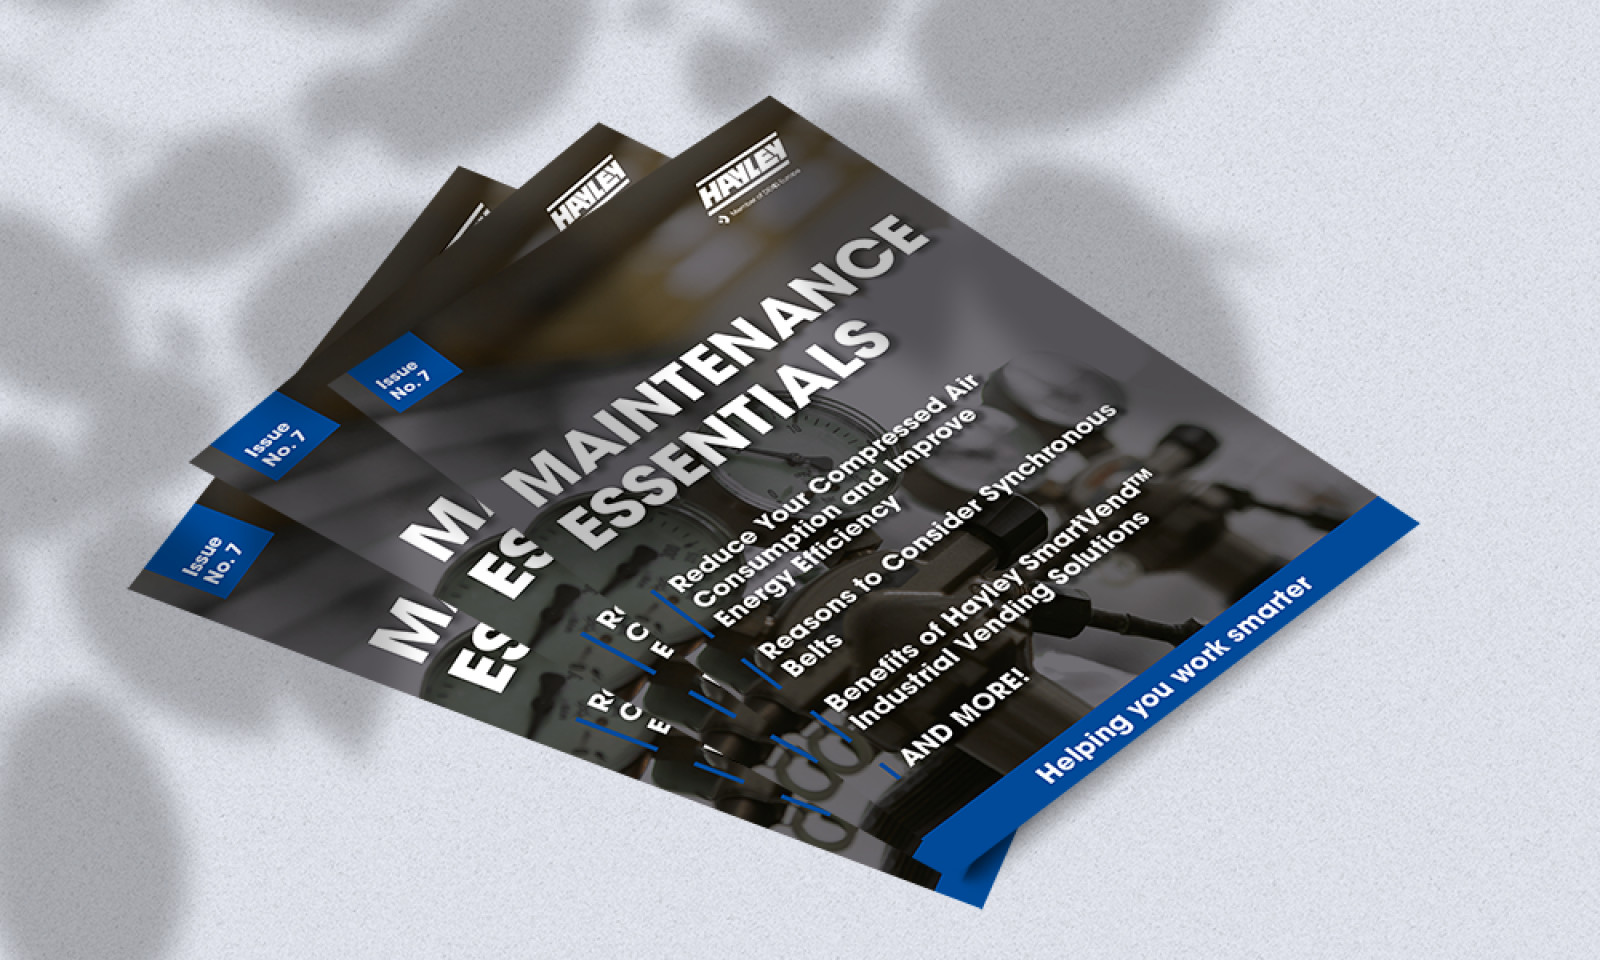 Maintenance Essentials Issue 7: Available Now!